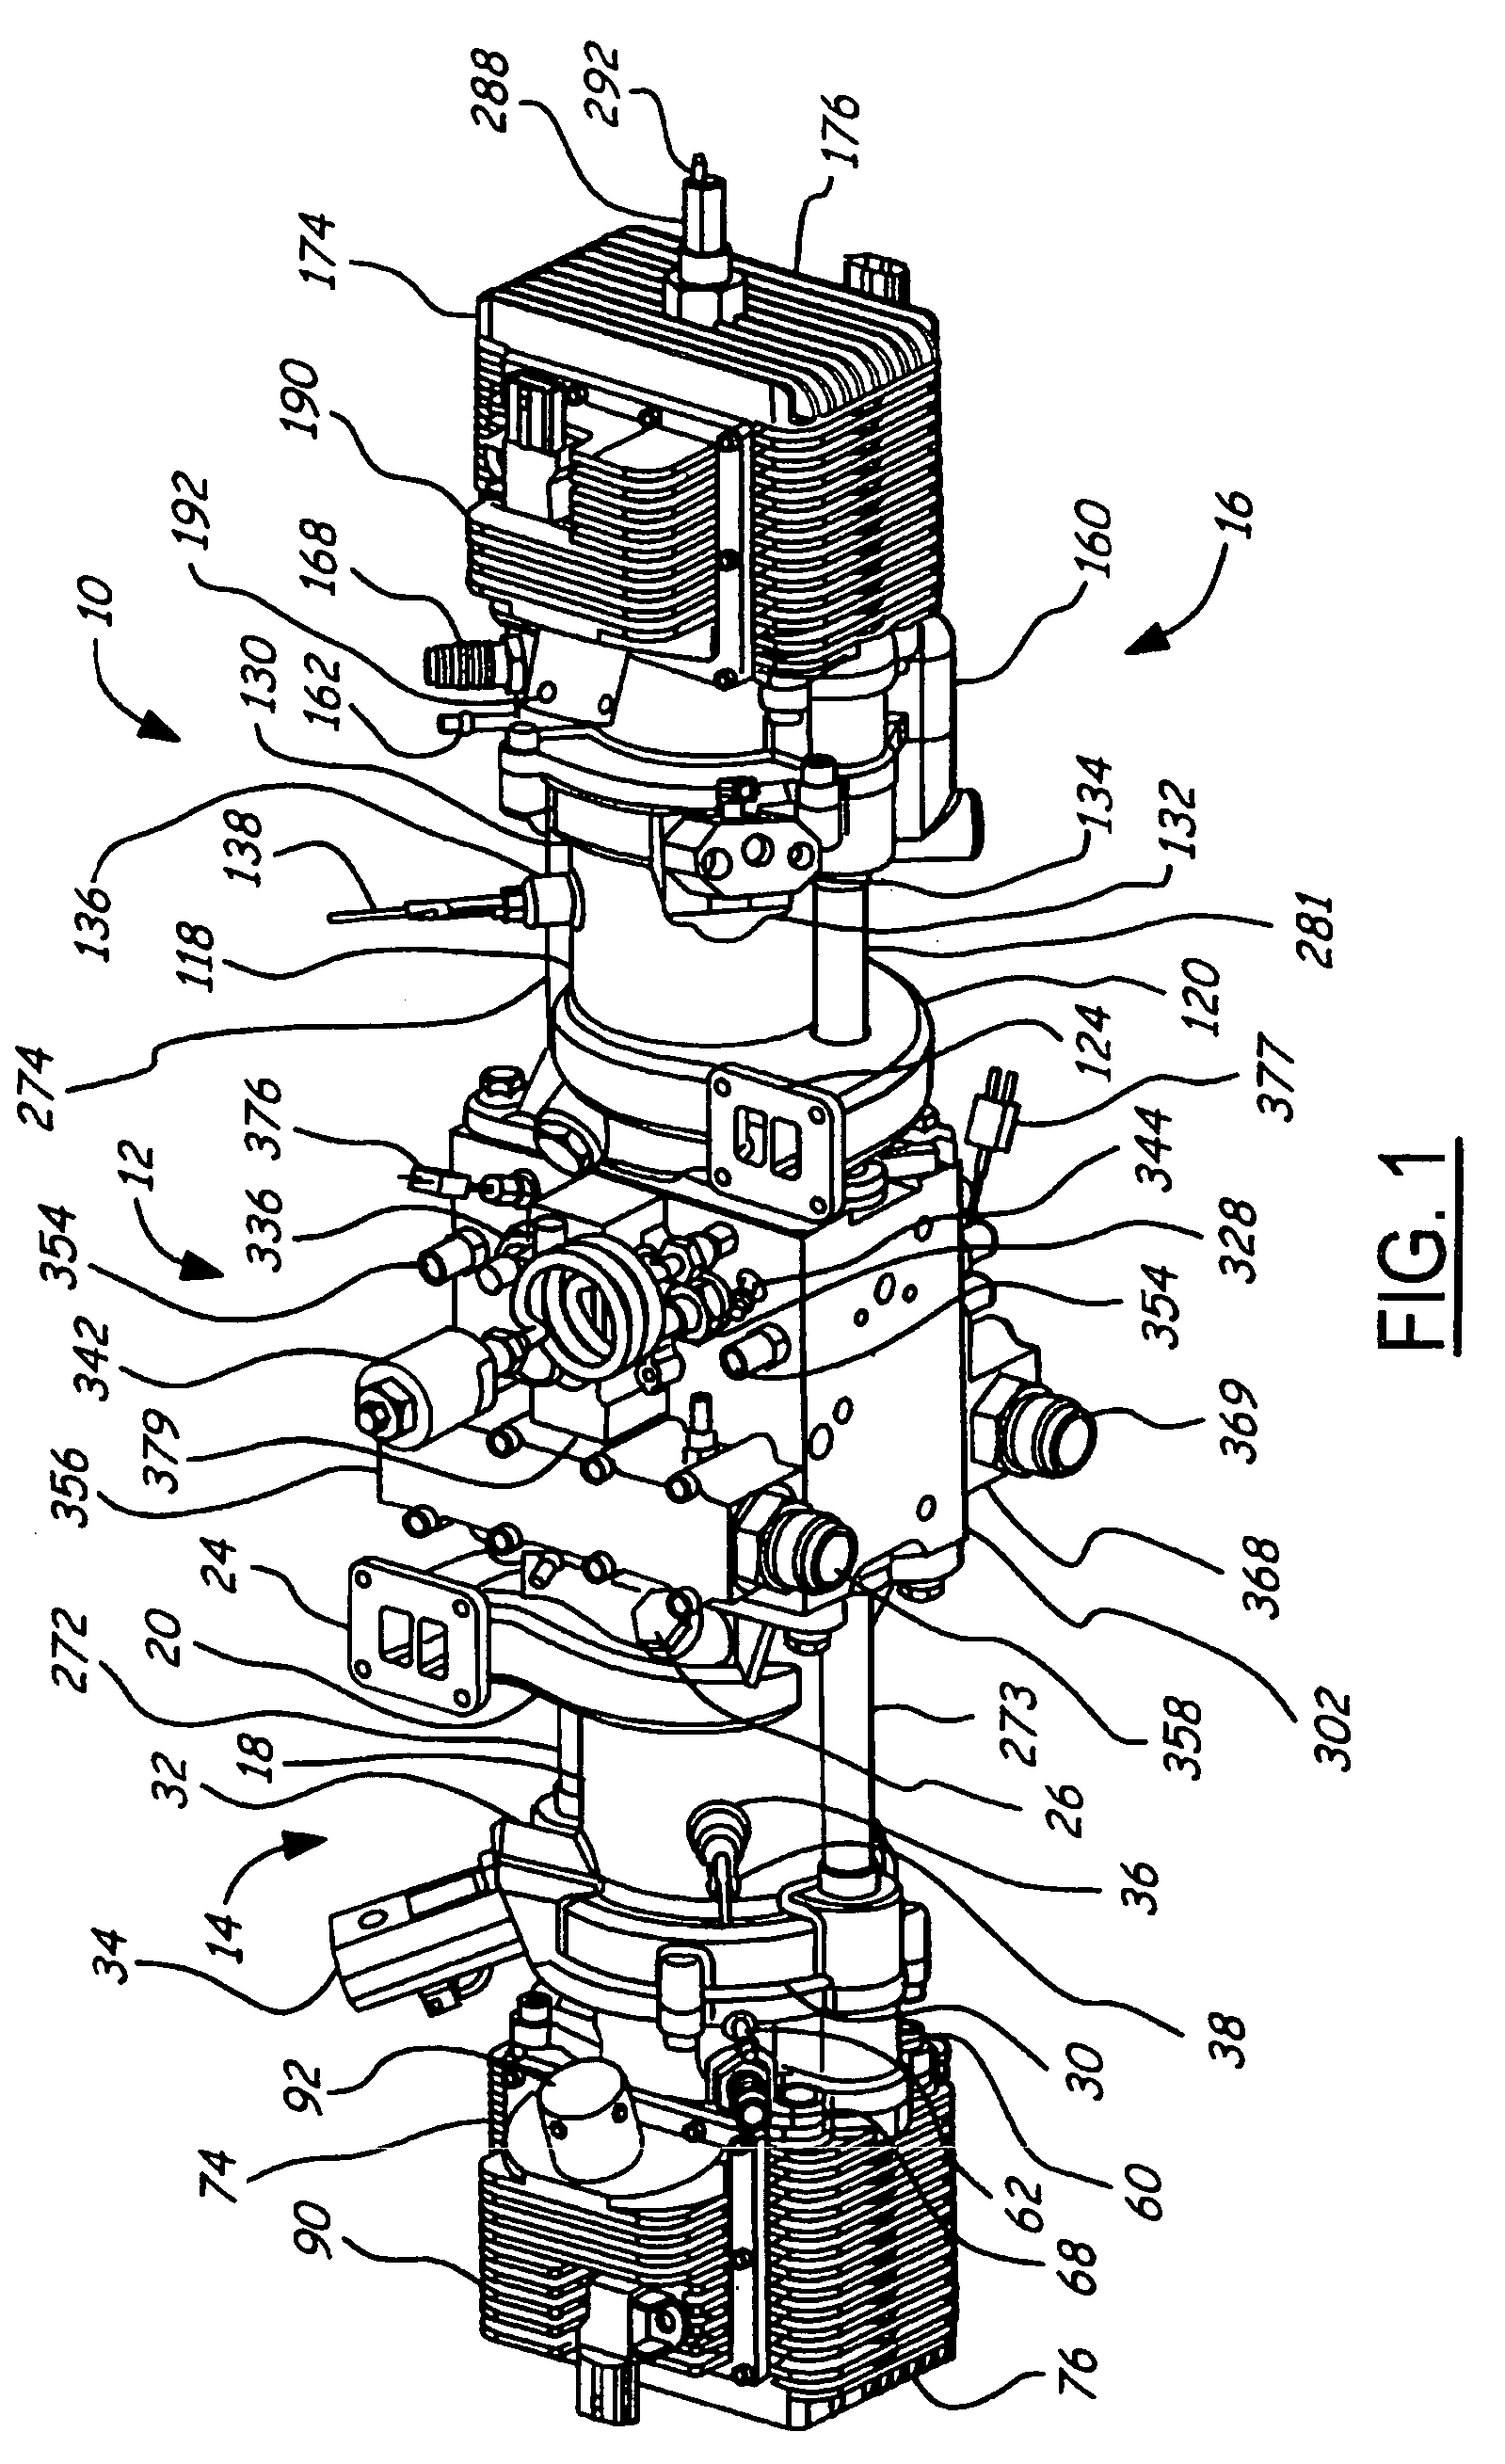 Air charging system for an opposed piston opposed cylinder free piston engine